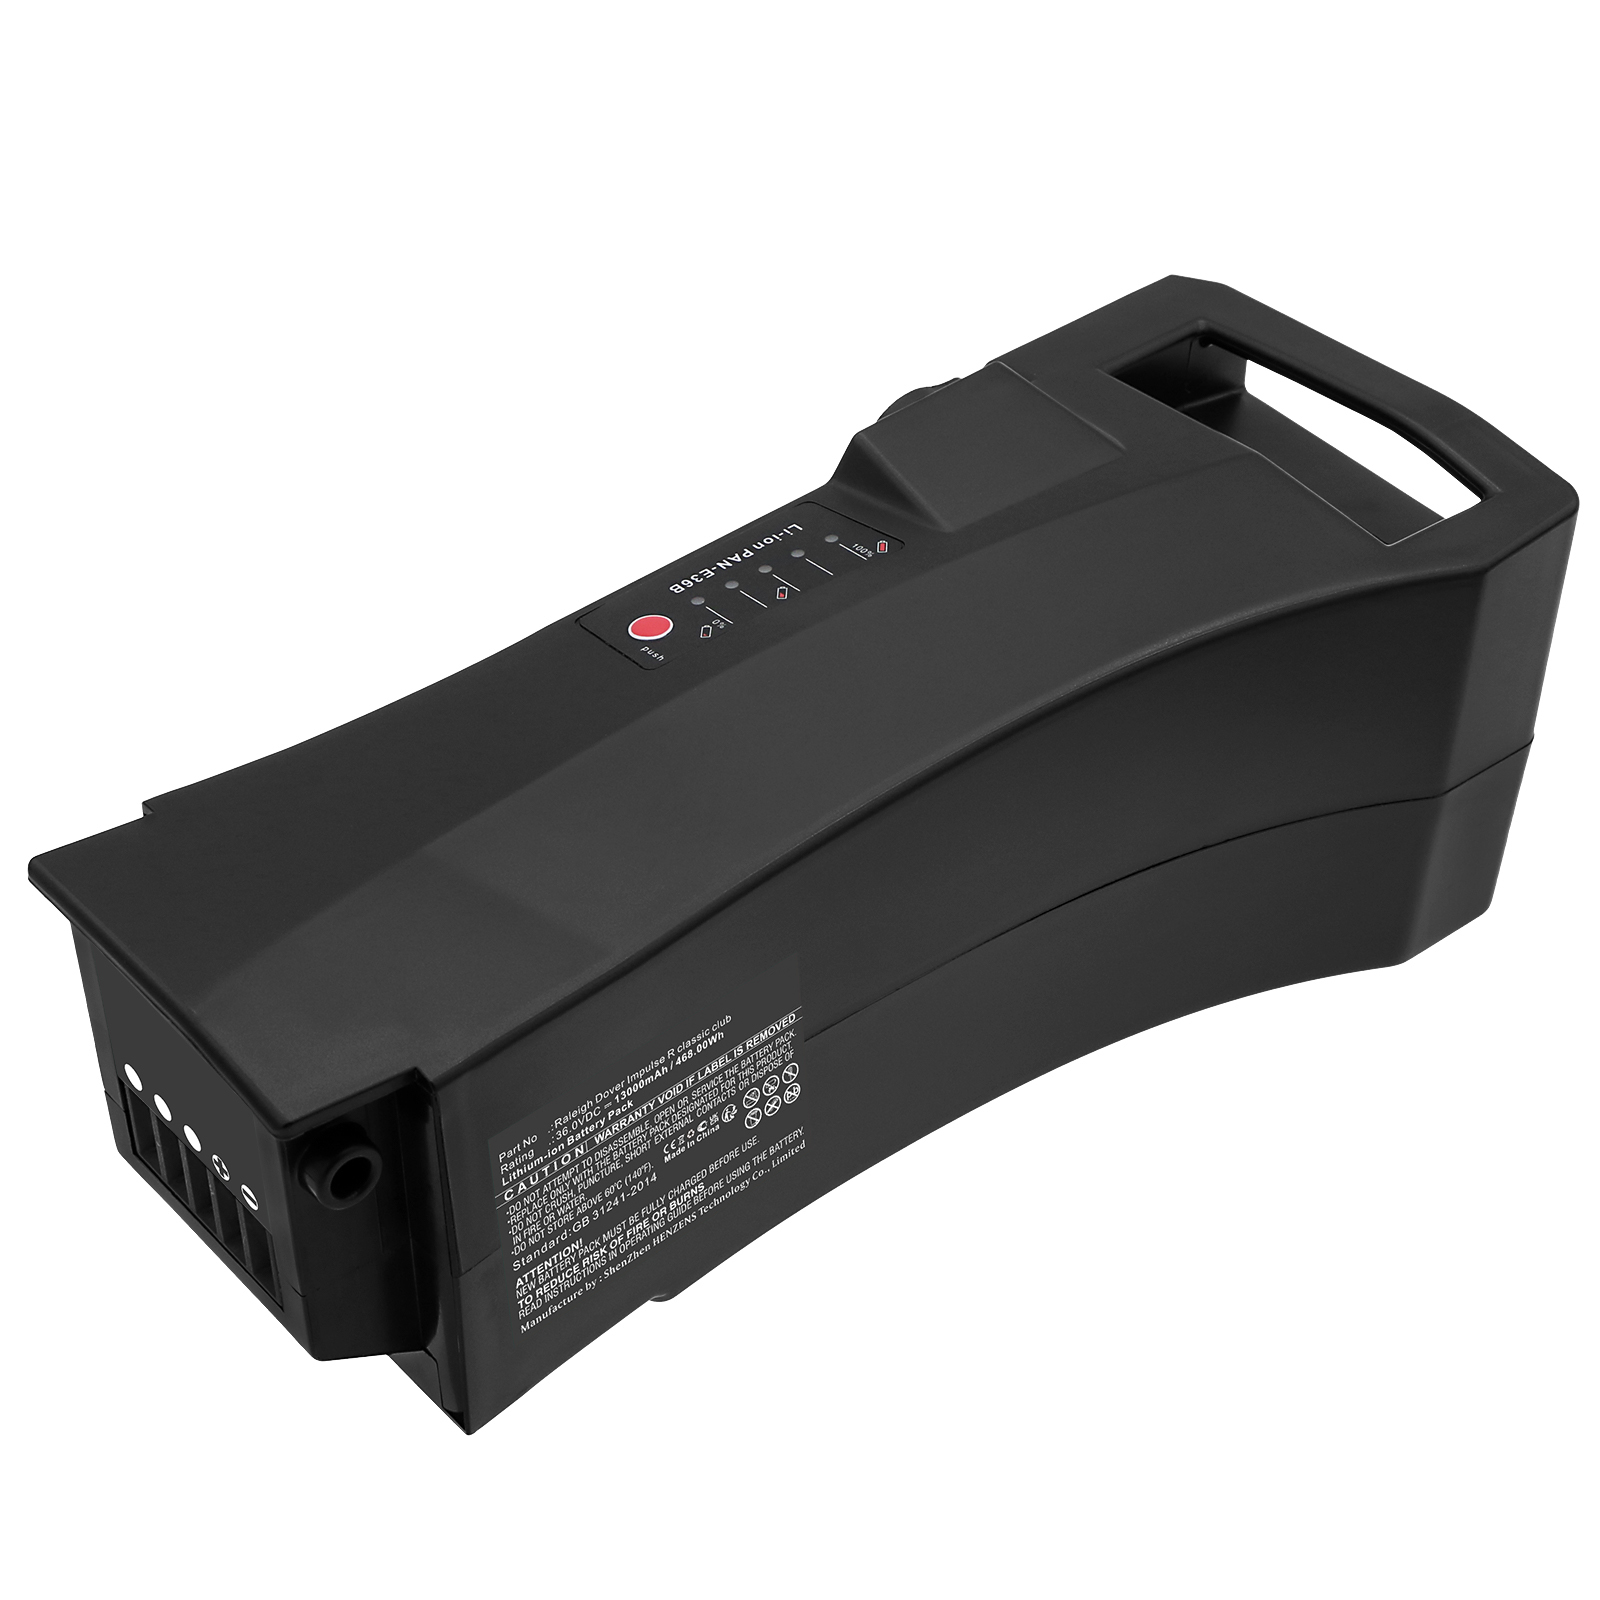 Synergy Digital Electric eBike Battery, Compatible with Panasonic Raleigh Dover Impulse R classic club Electric eBike Battery (Li-ion, 36V, 13000mAh)